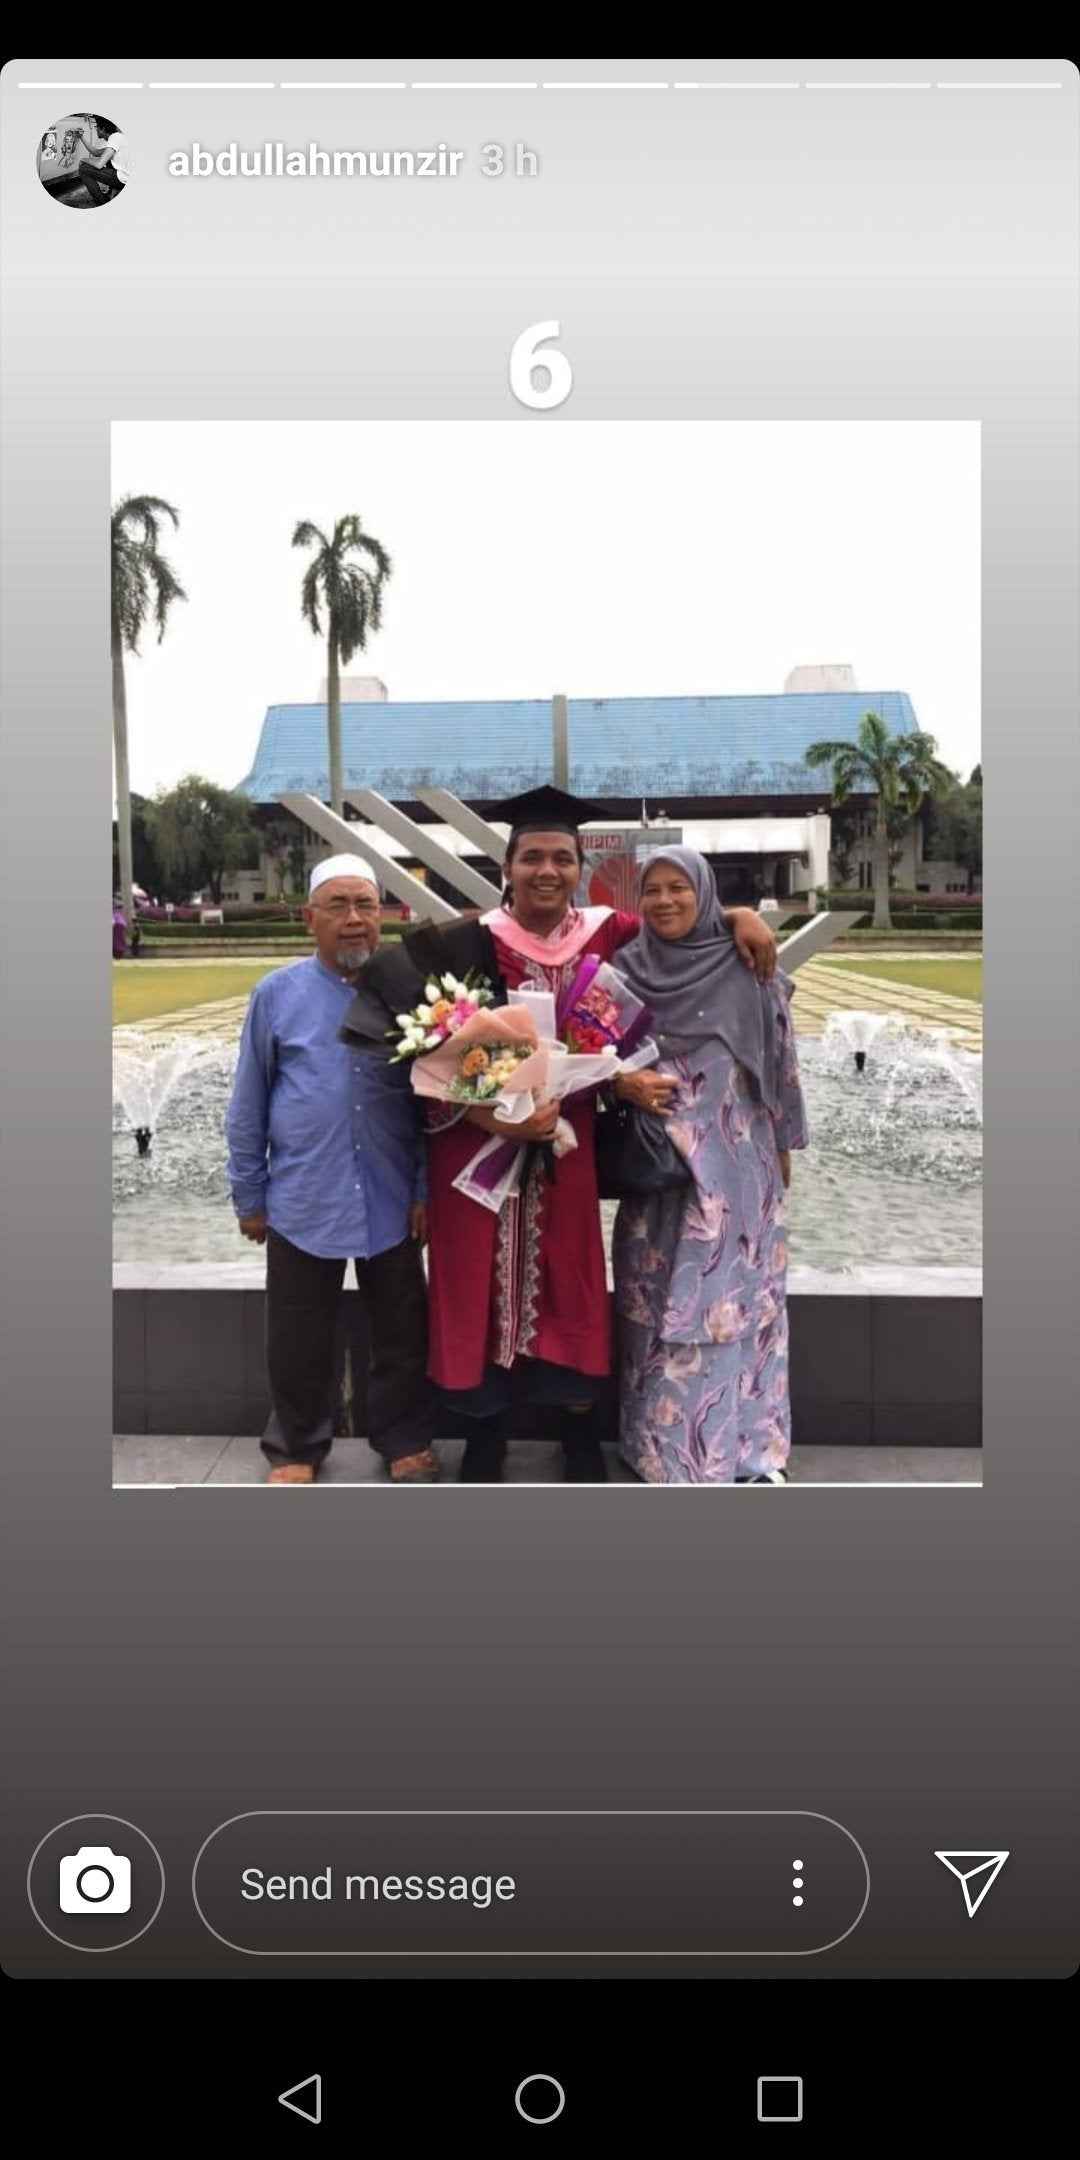 He Lost His Father Recently So He Skipped Graduation But Made A Bittersweet Story Thread Of Him Instead - WORLD OF BUZZ 5